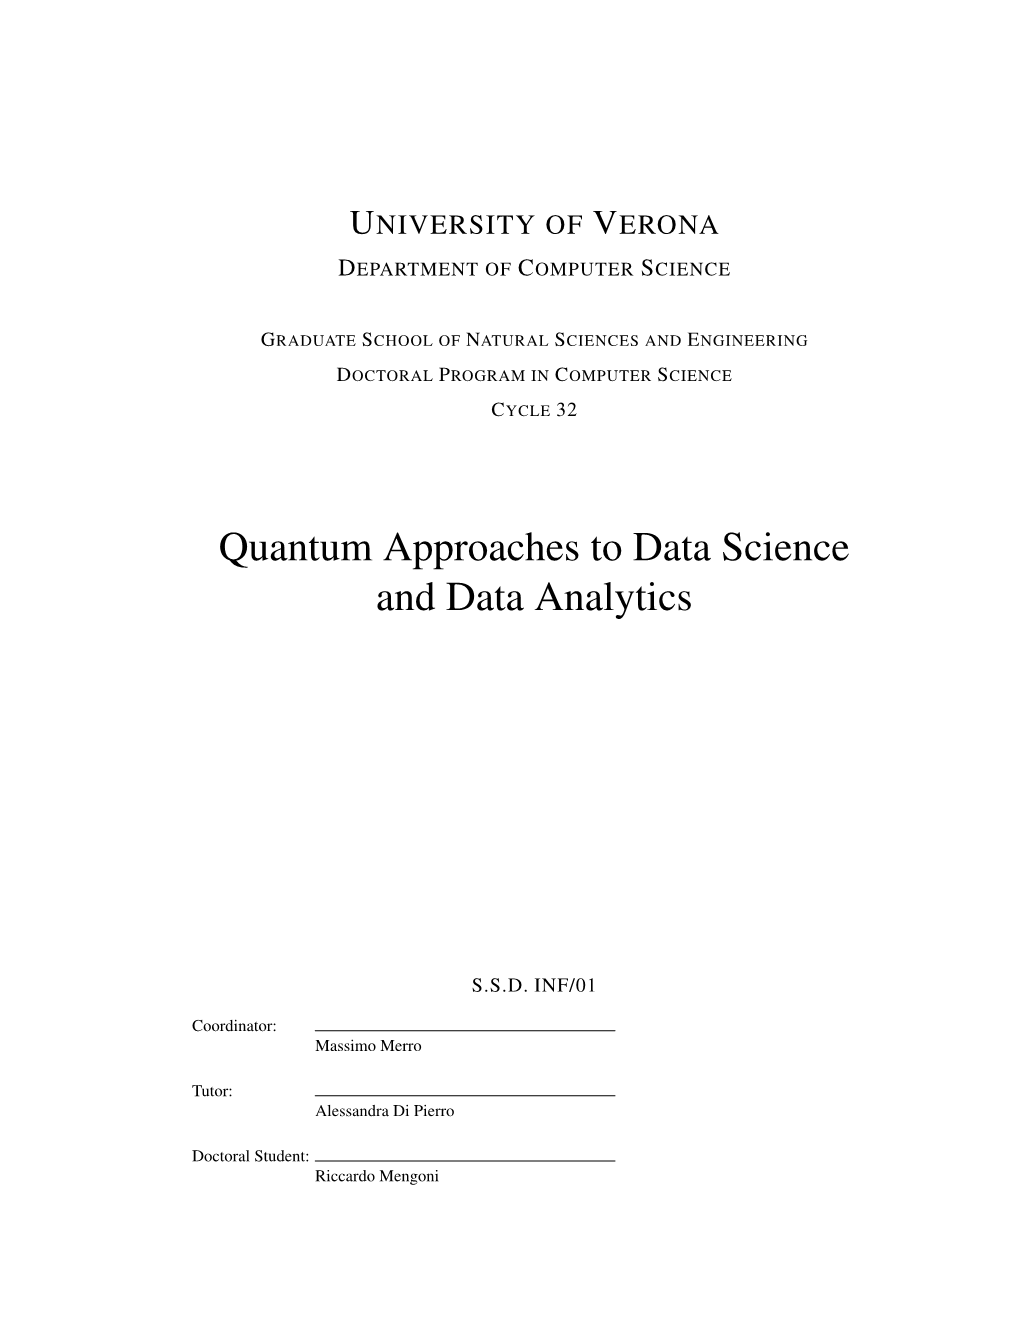 Quantum Approaches to Data Science and Data Analytics